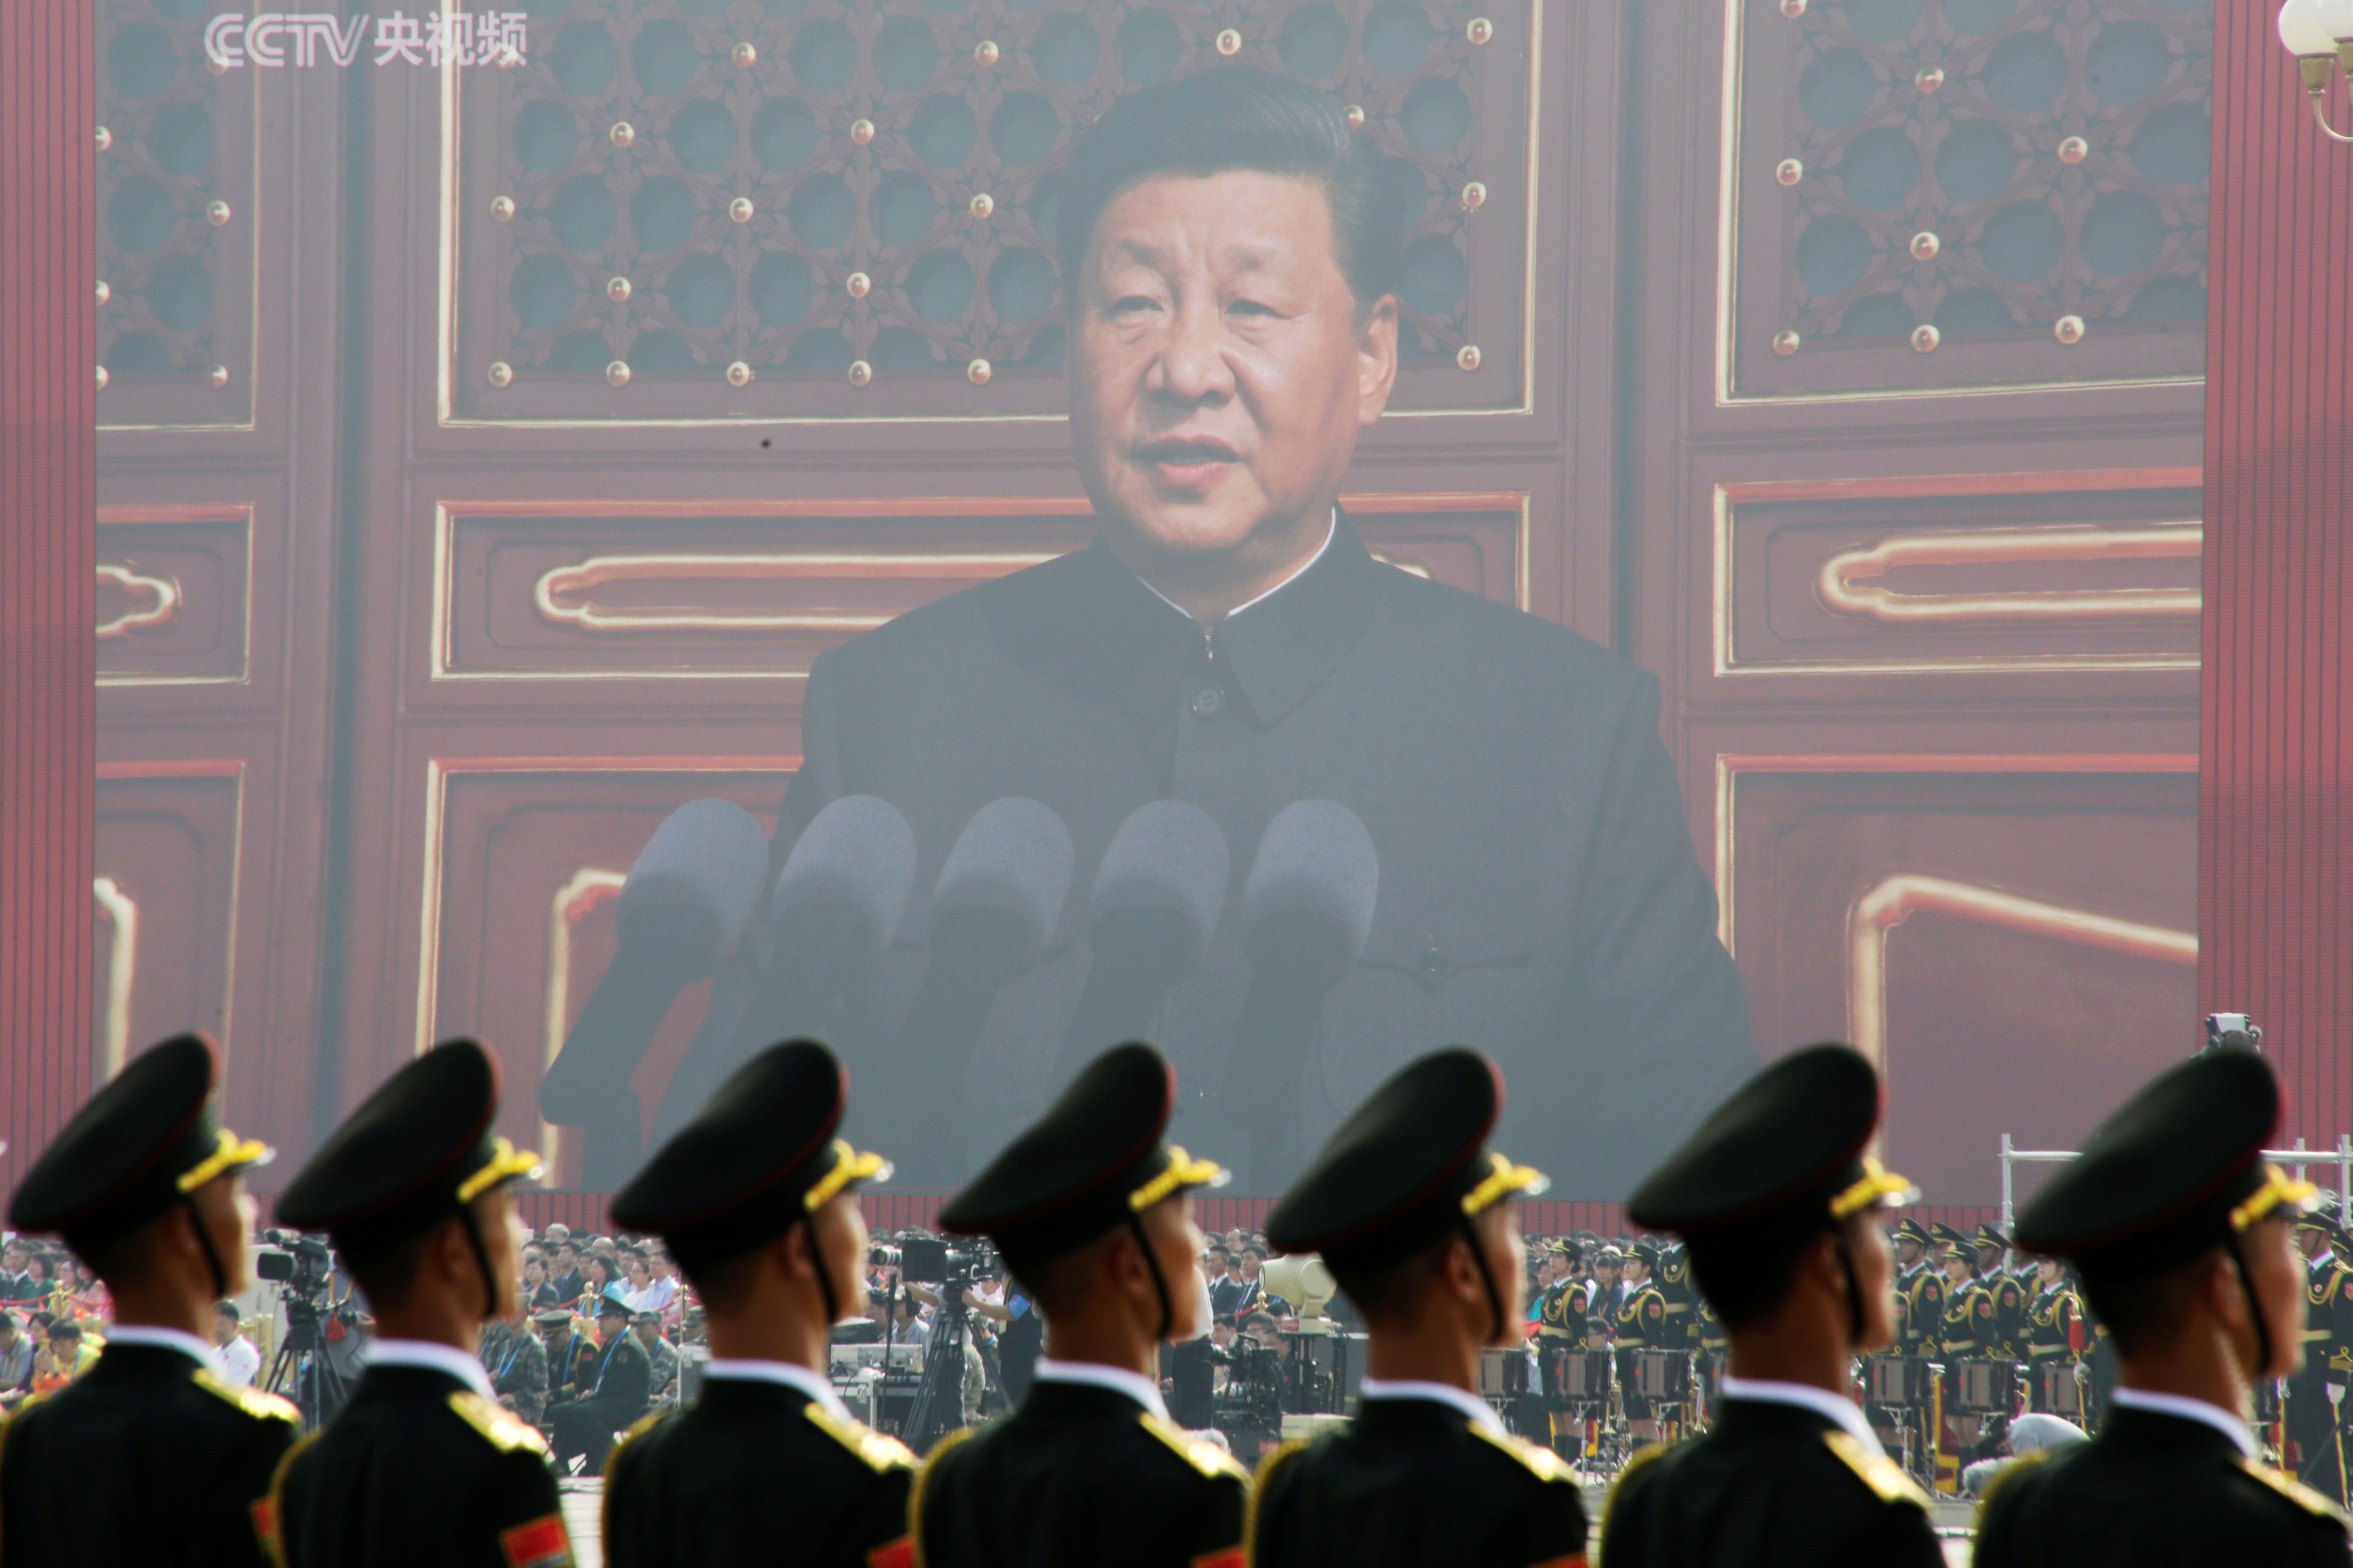 Xi Jinping's regime threatened to 